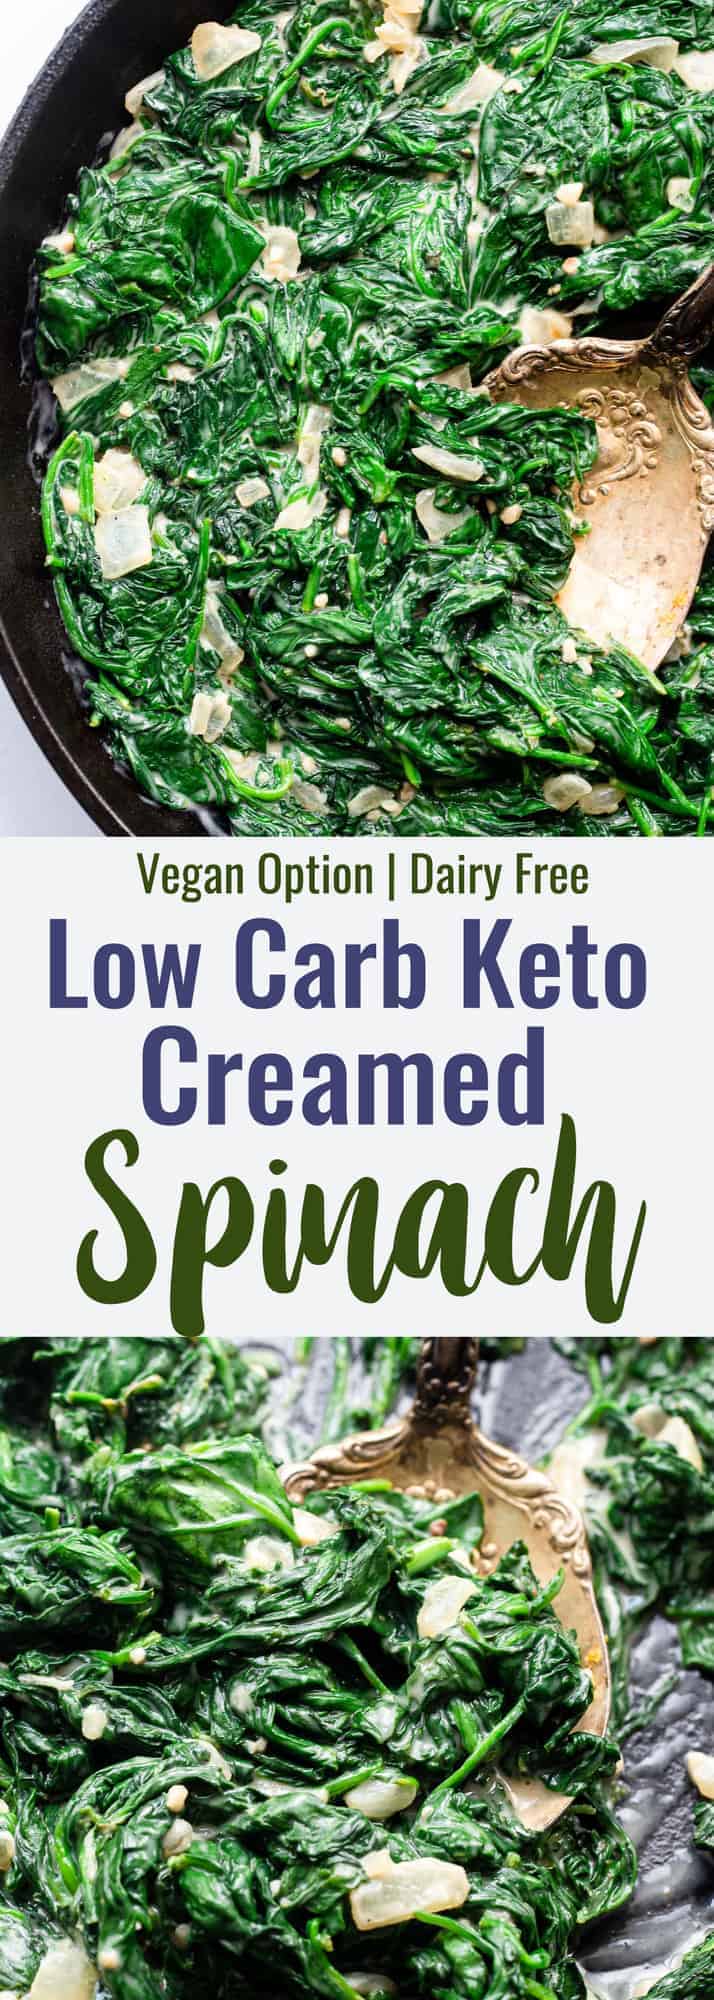 Keto Creamed Spinach collage photo